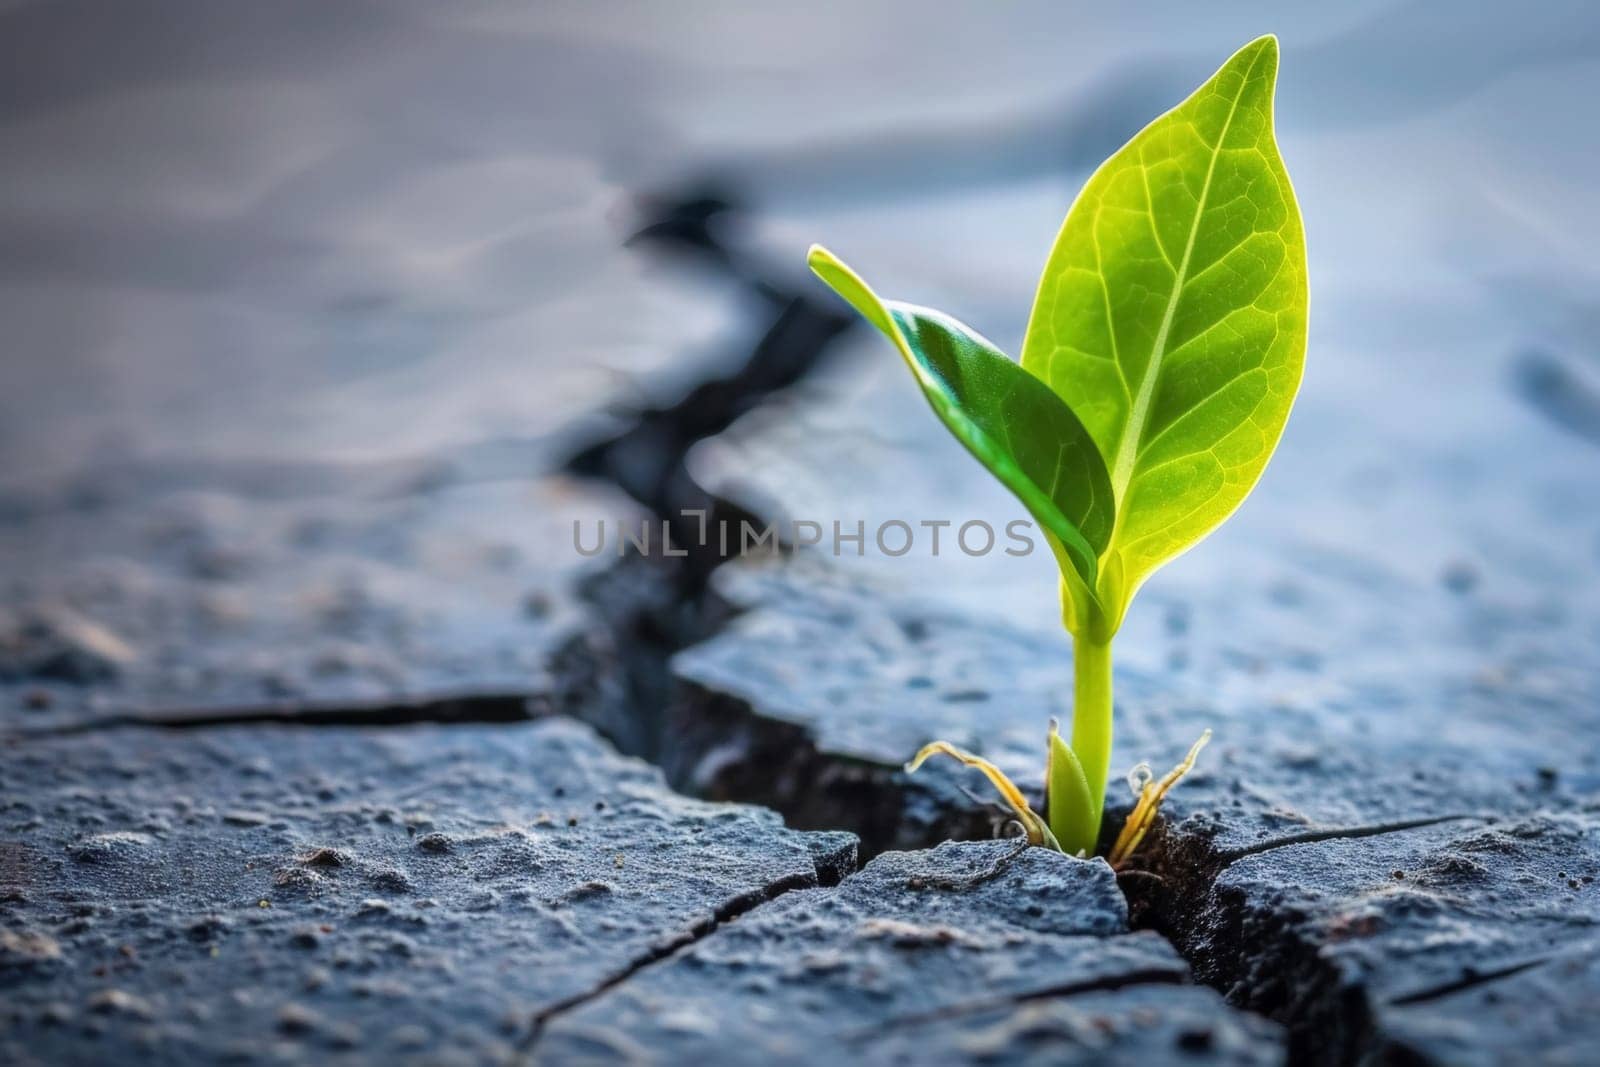 Sapling in Dry Earth by andreyz